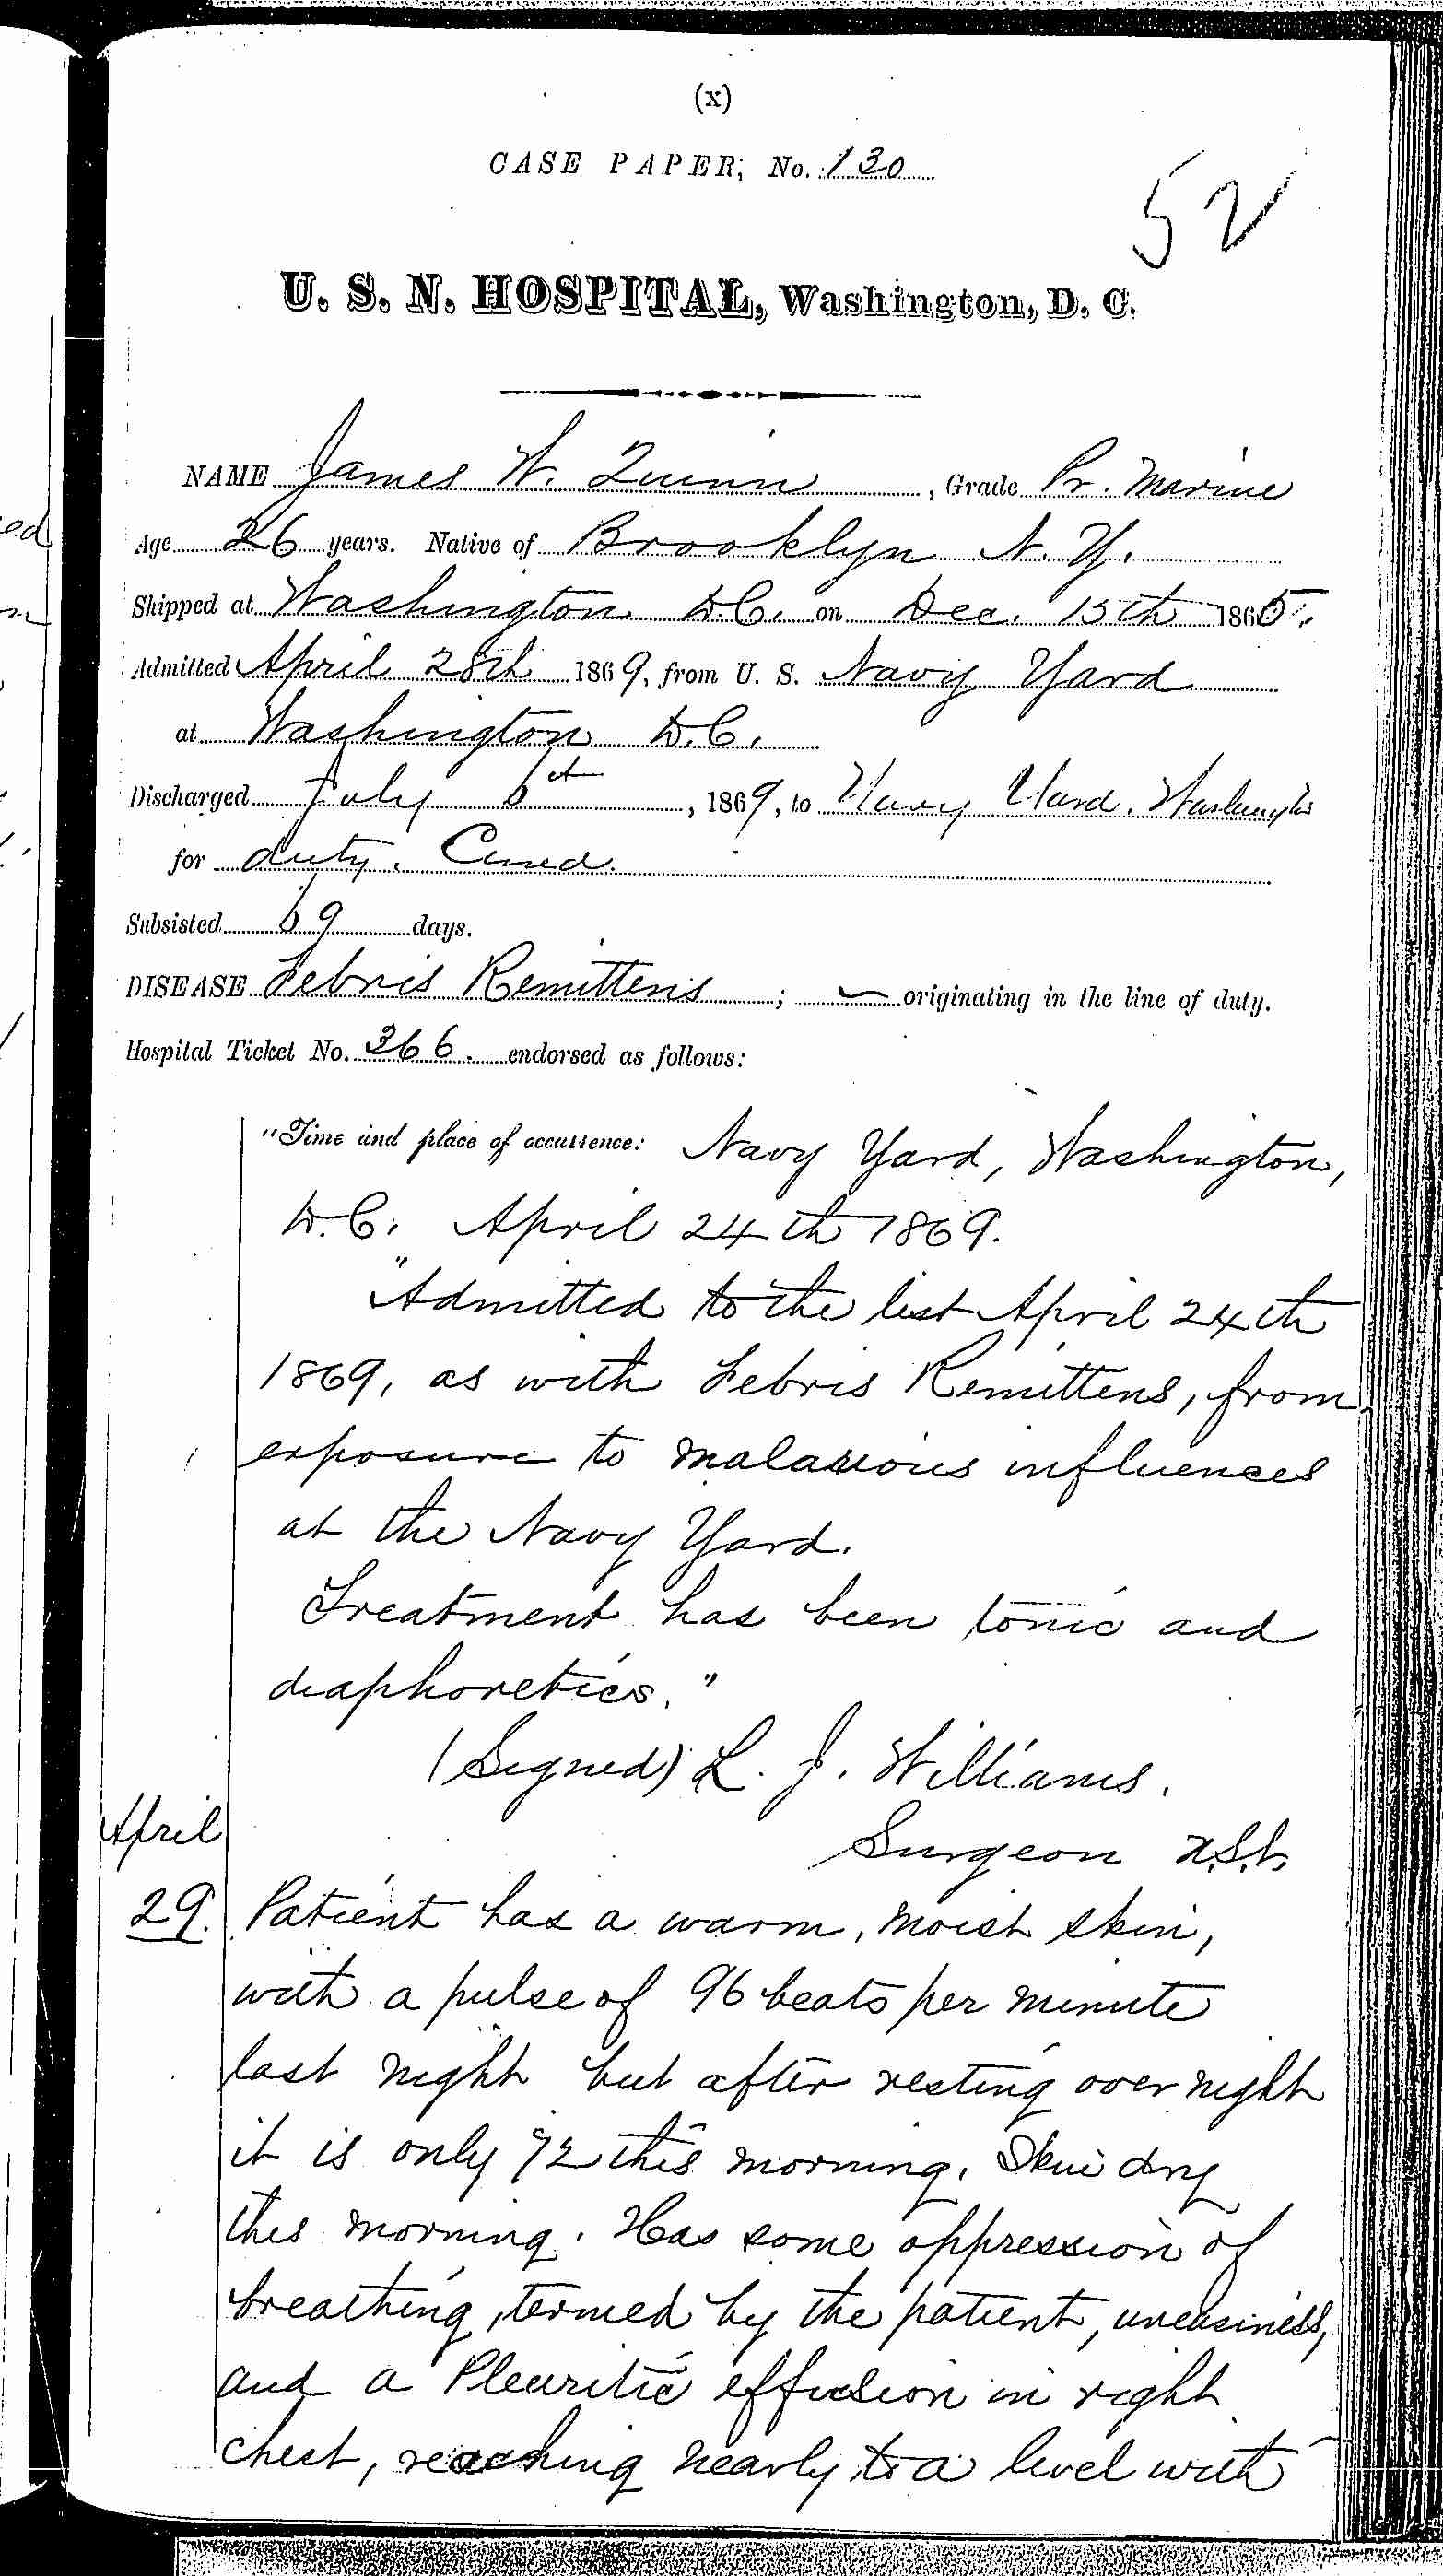 Entry for James W. Quinn (page 1 of 7) in the log Hospital Tickets and Case Papers - Naval Hospital - Washington, D.C. - 1868-69